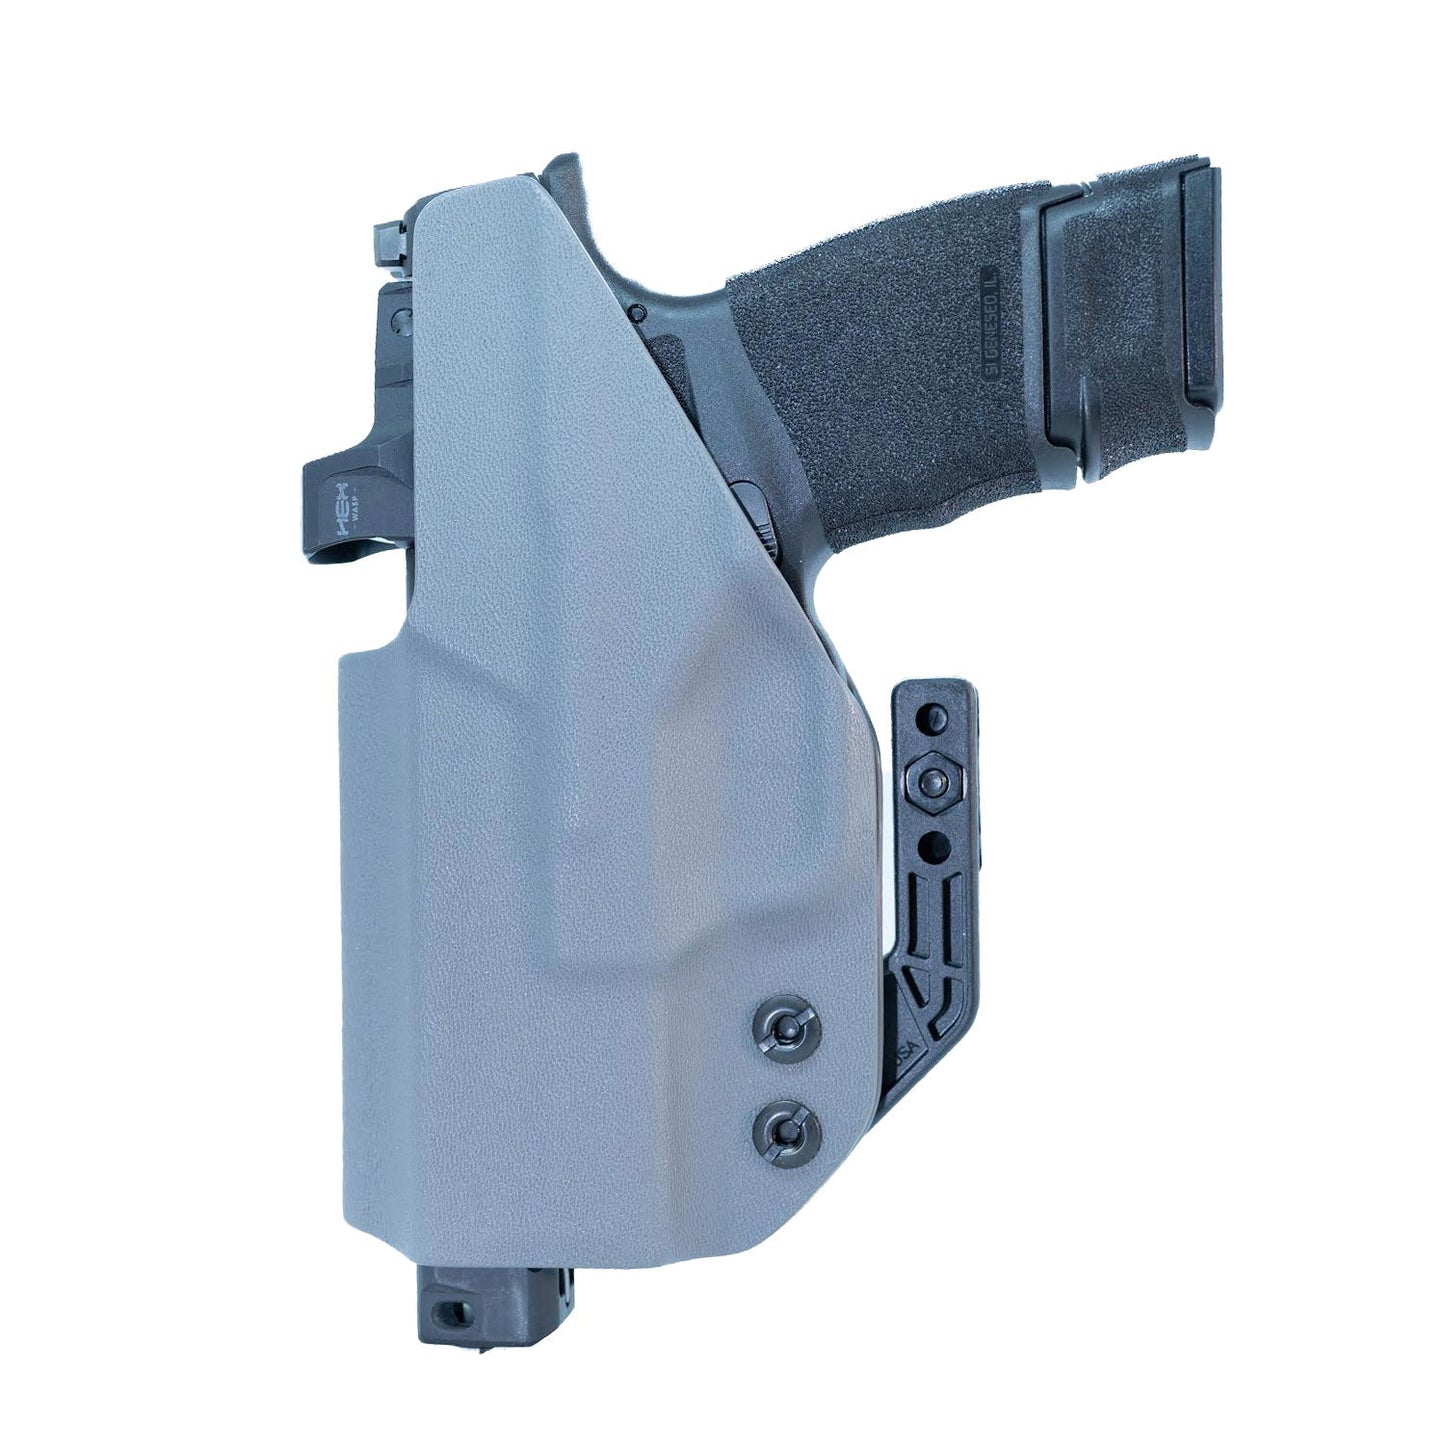 S&W Body Guard .380 w/ Integrated Laser IWB (Inside The Waistband Holster)